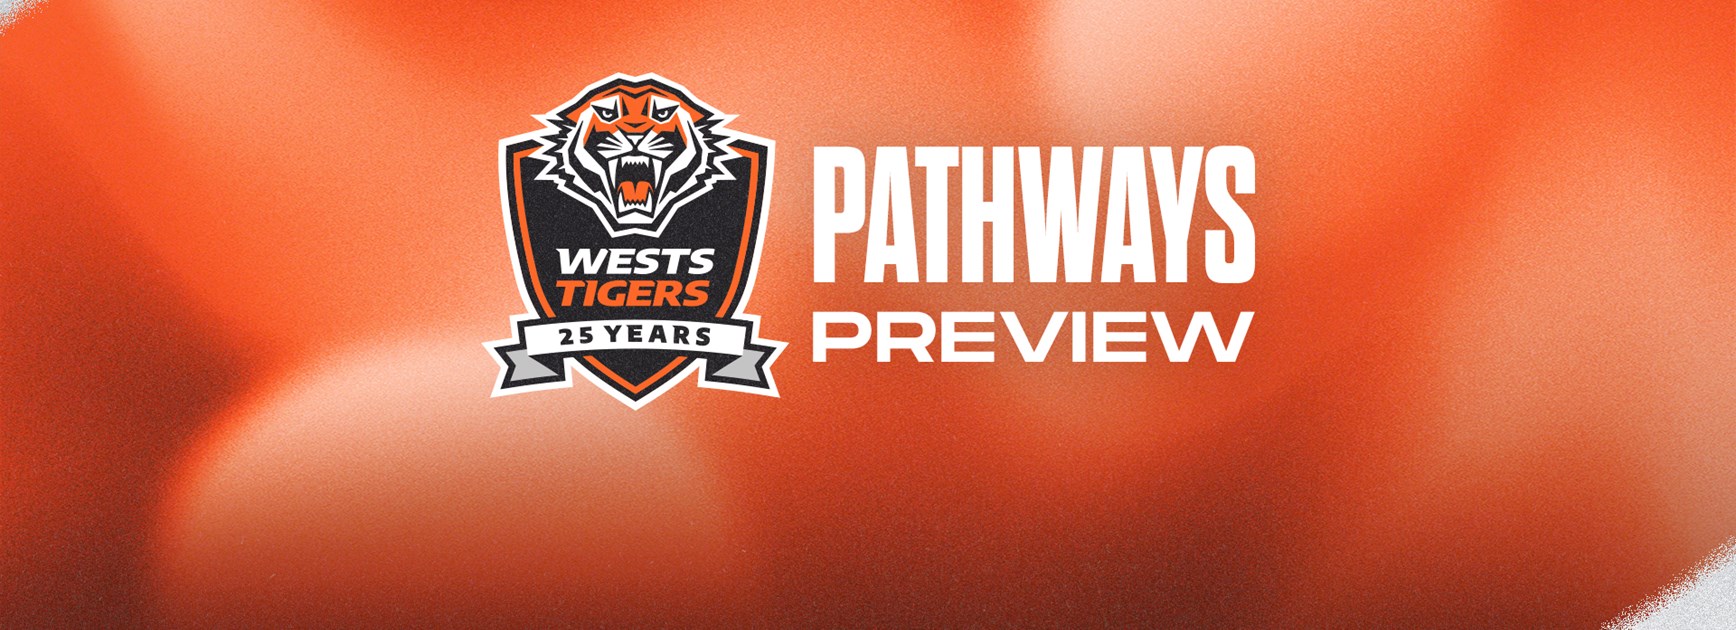 Pathways Preview: Round 2